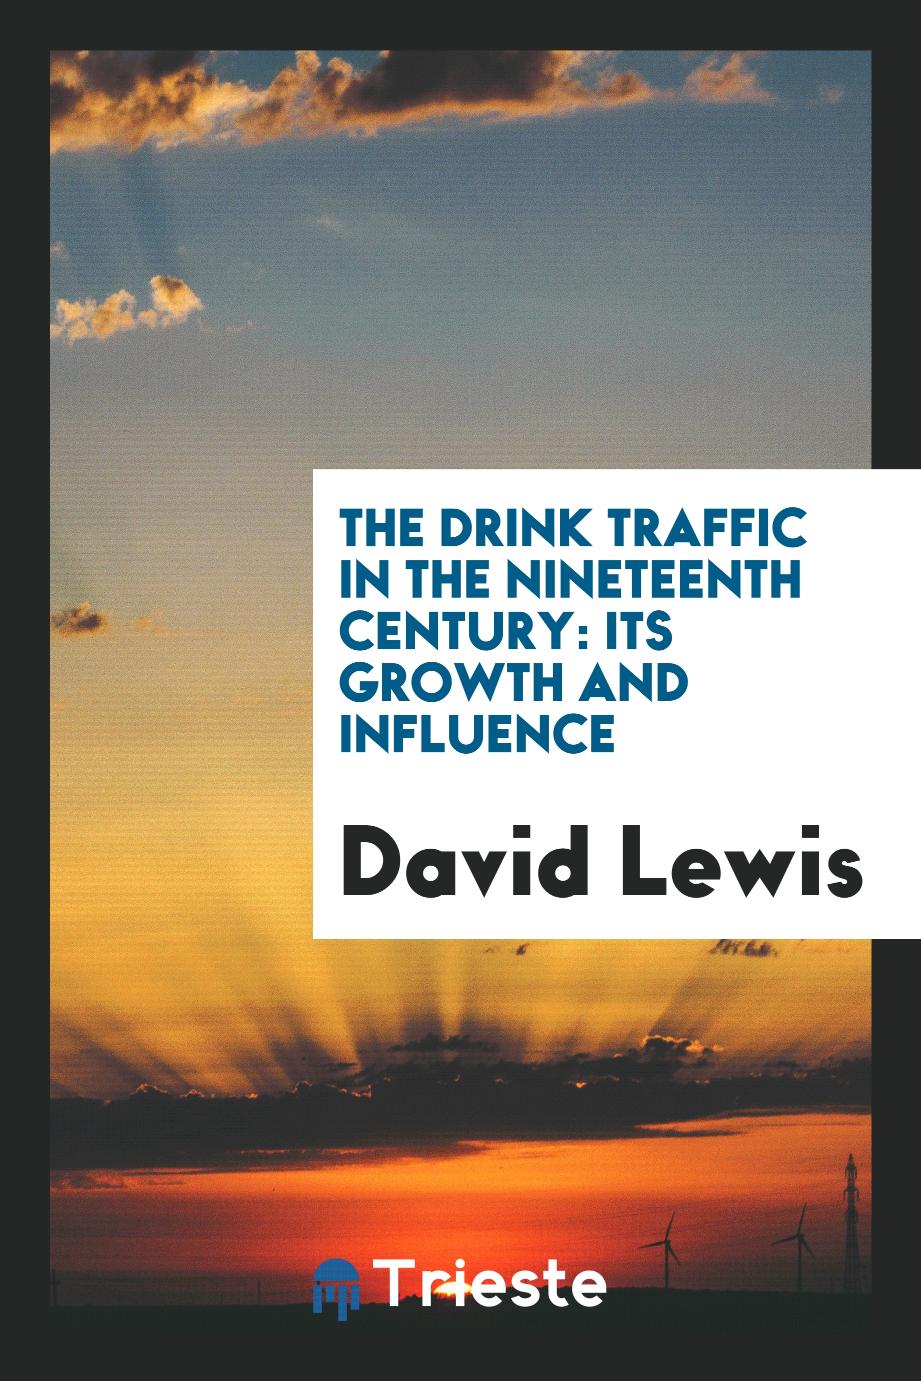 The Drink Traffic in the Nineteenth Century: Its Growth and Influence